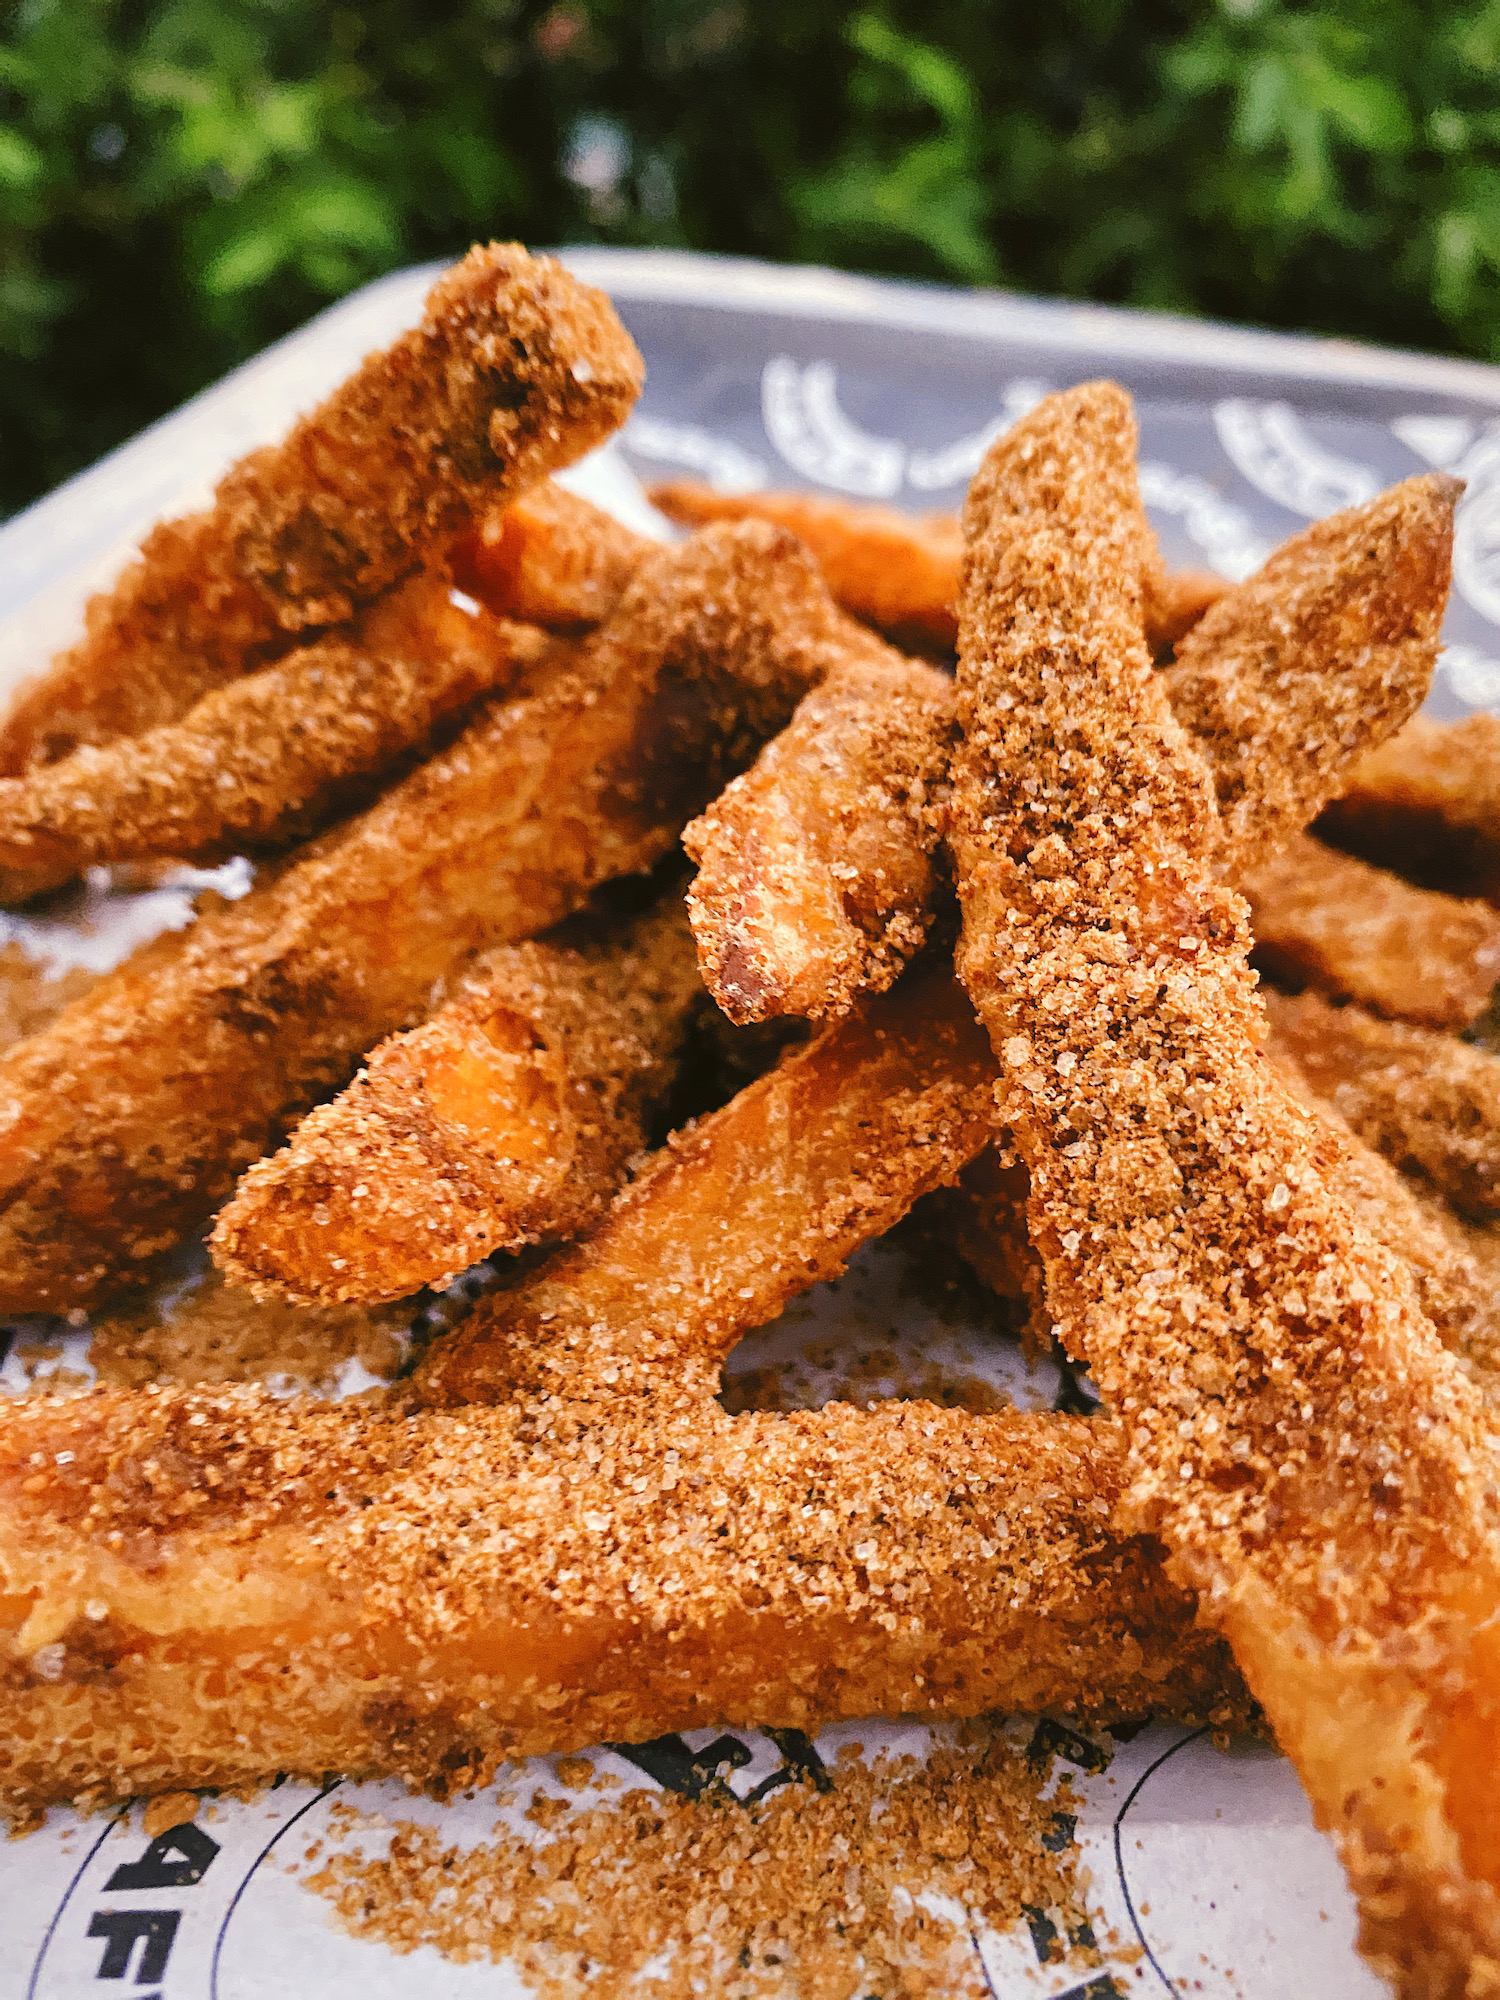 You also have the option to add on these kamote fries dusted with sweet and salty nut powder and four-spice batter